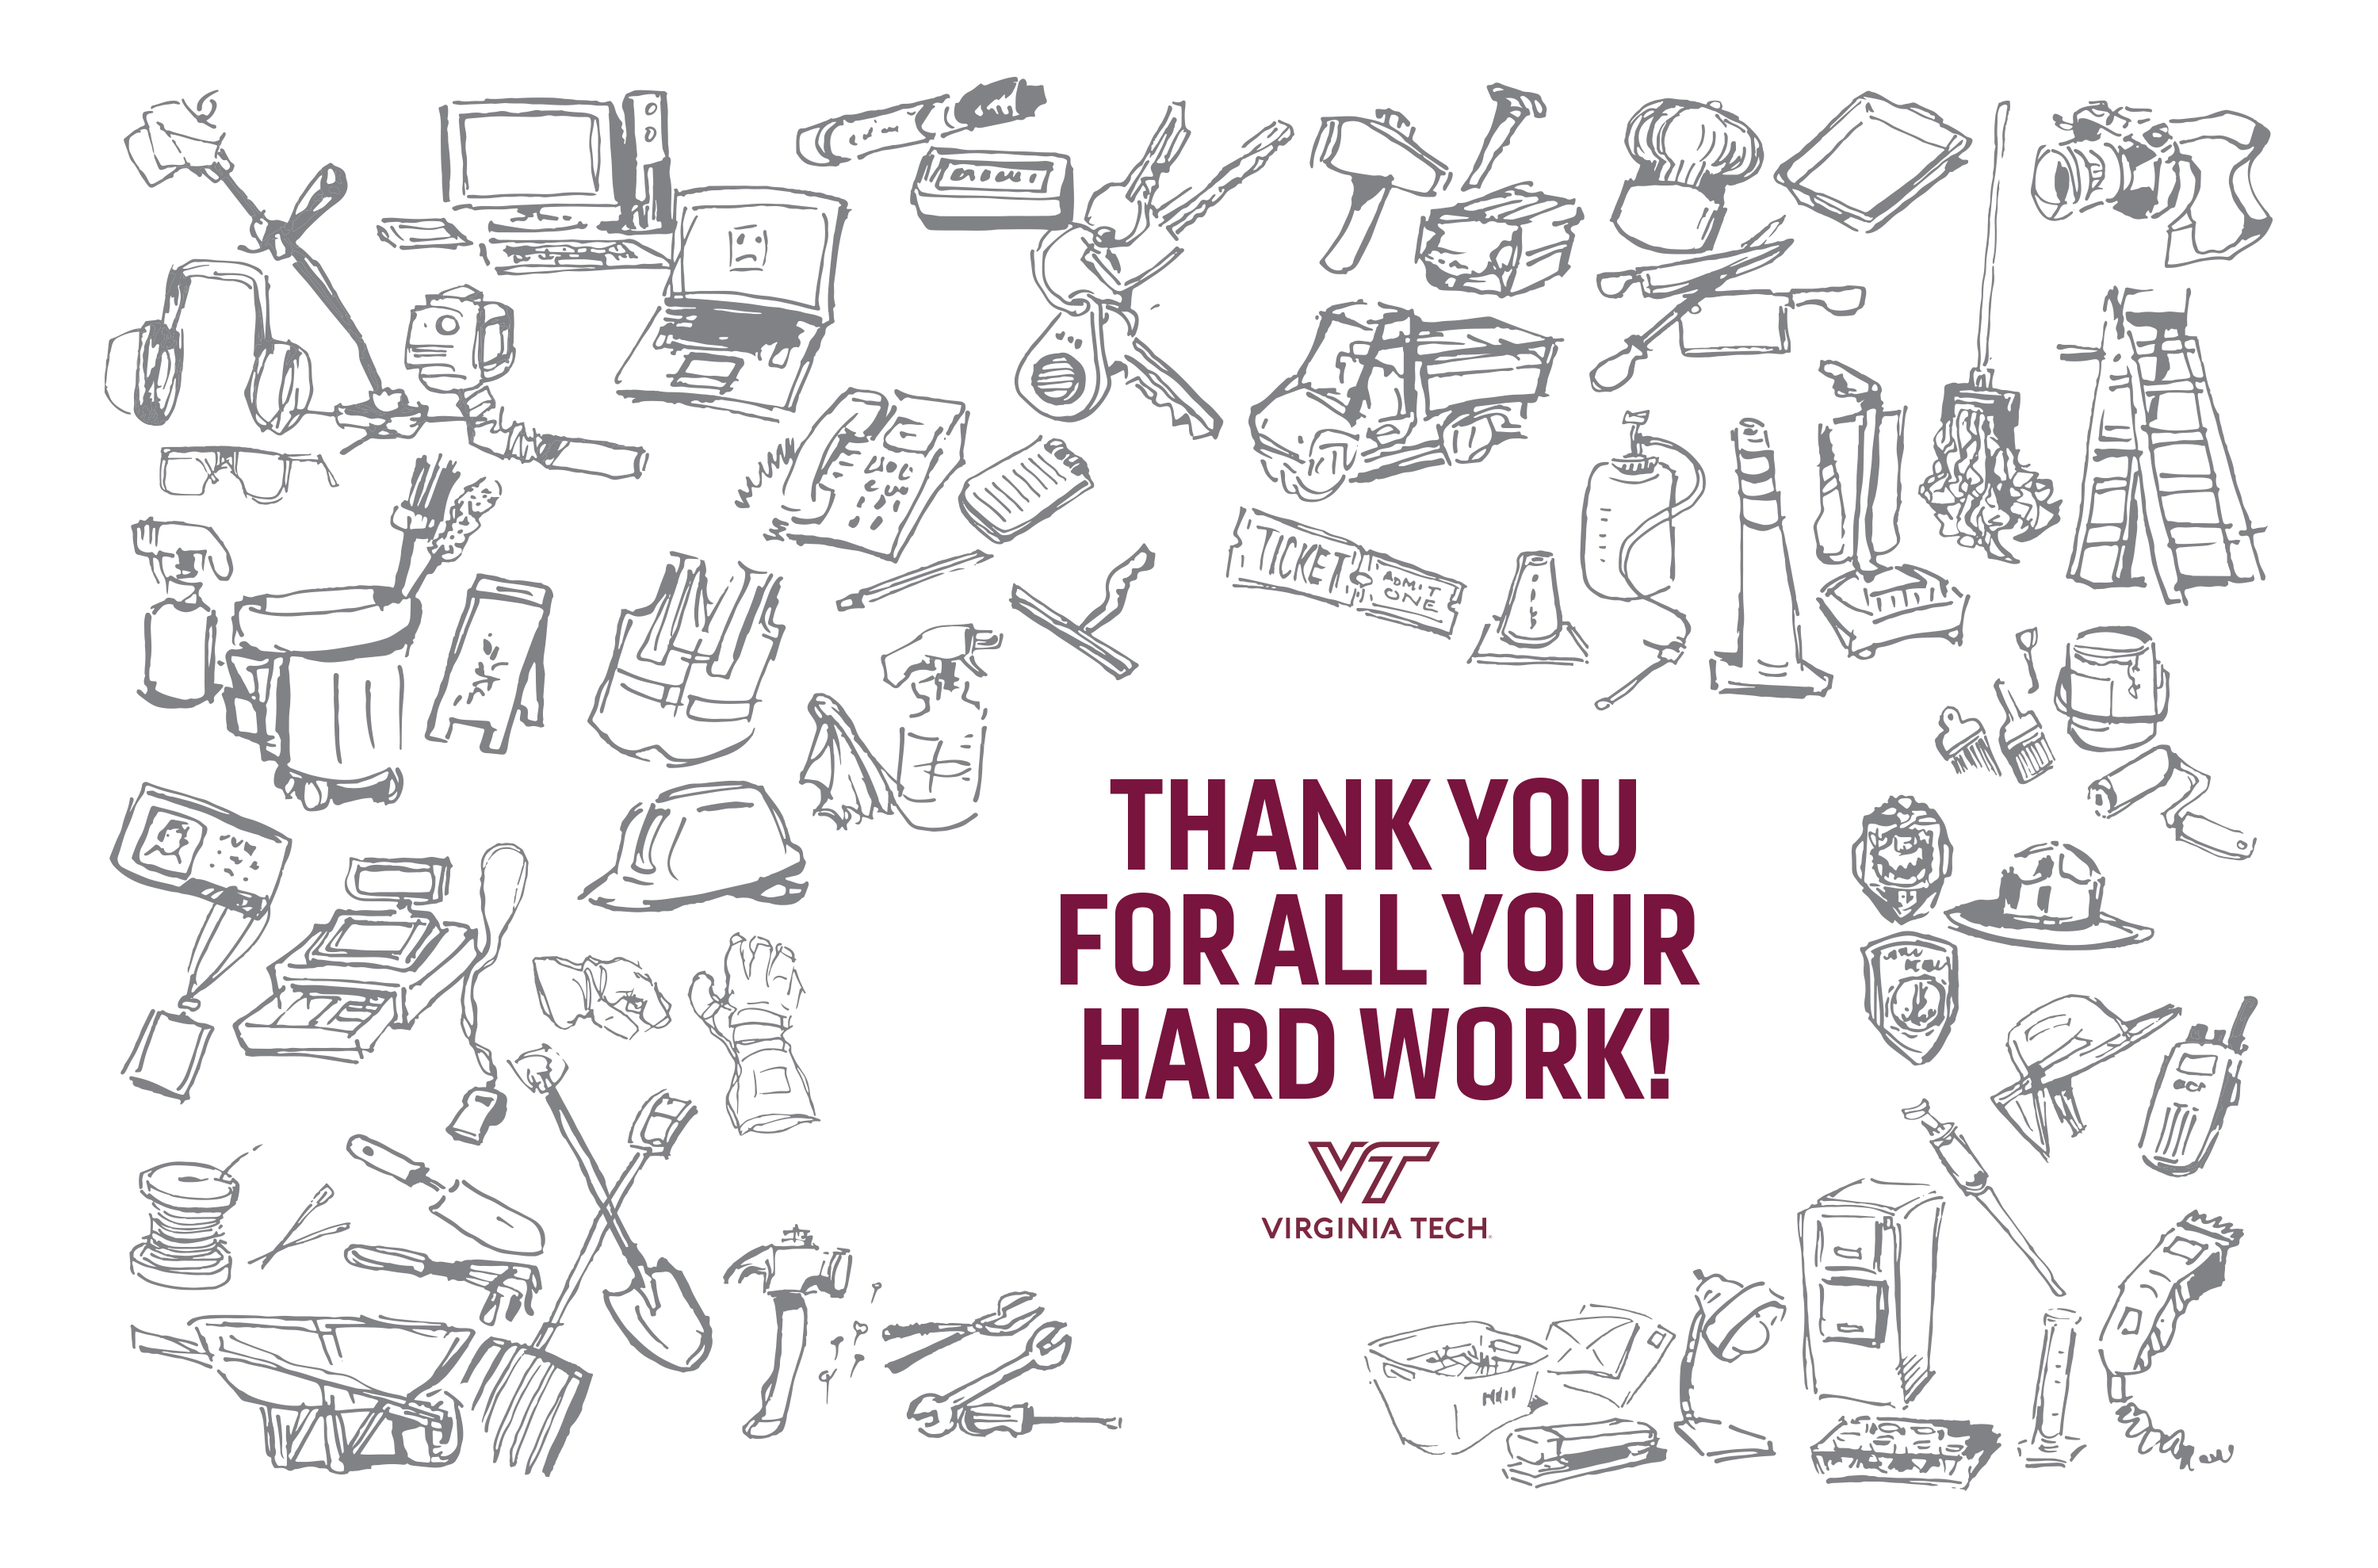 Illustration of objects used by staff to do their jobs